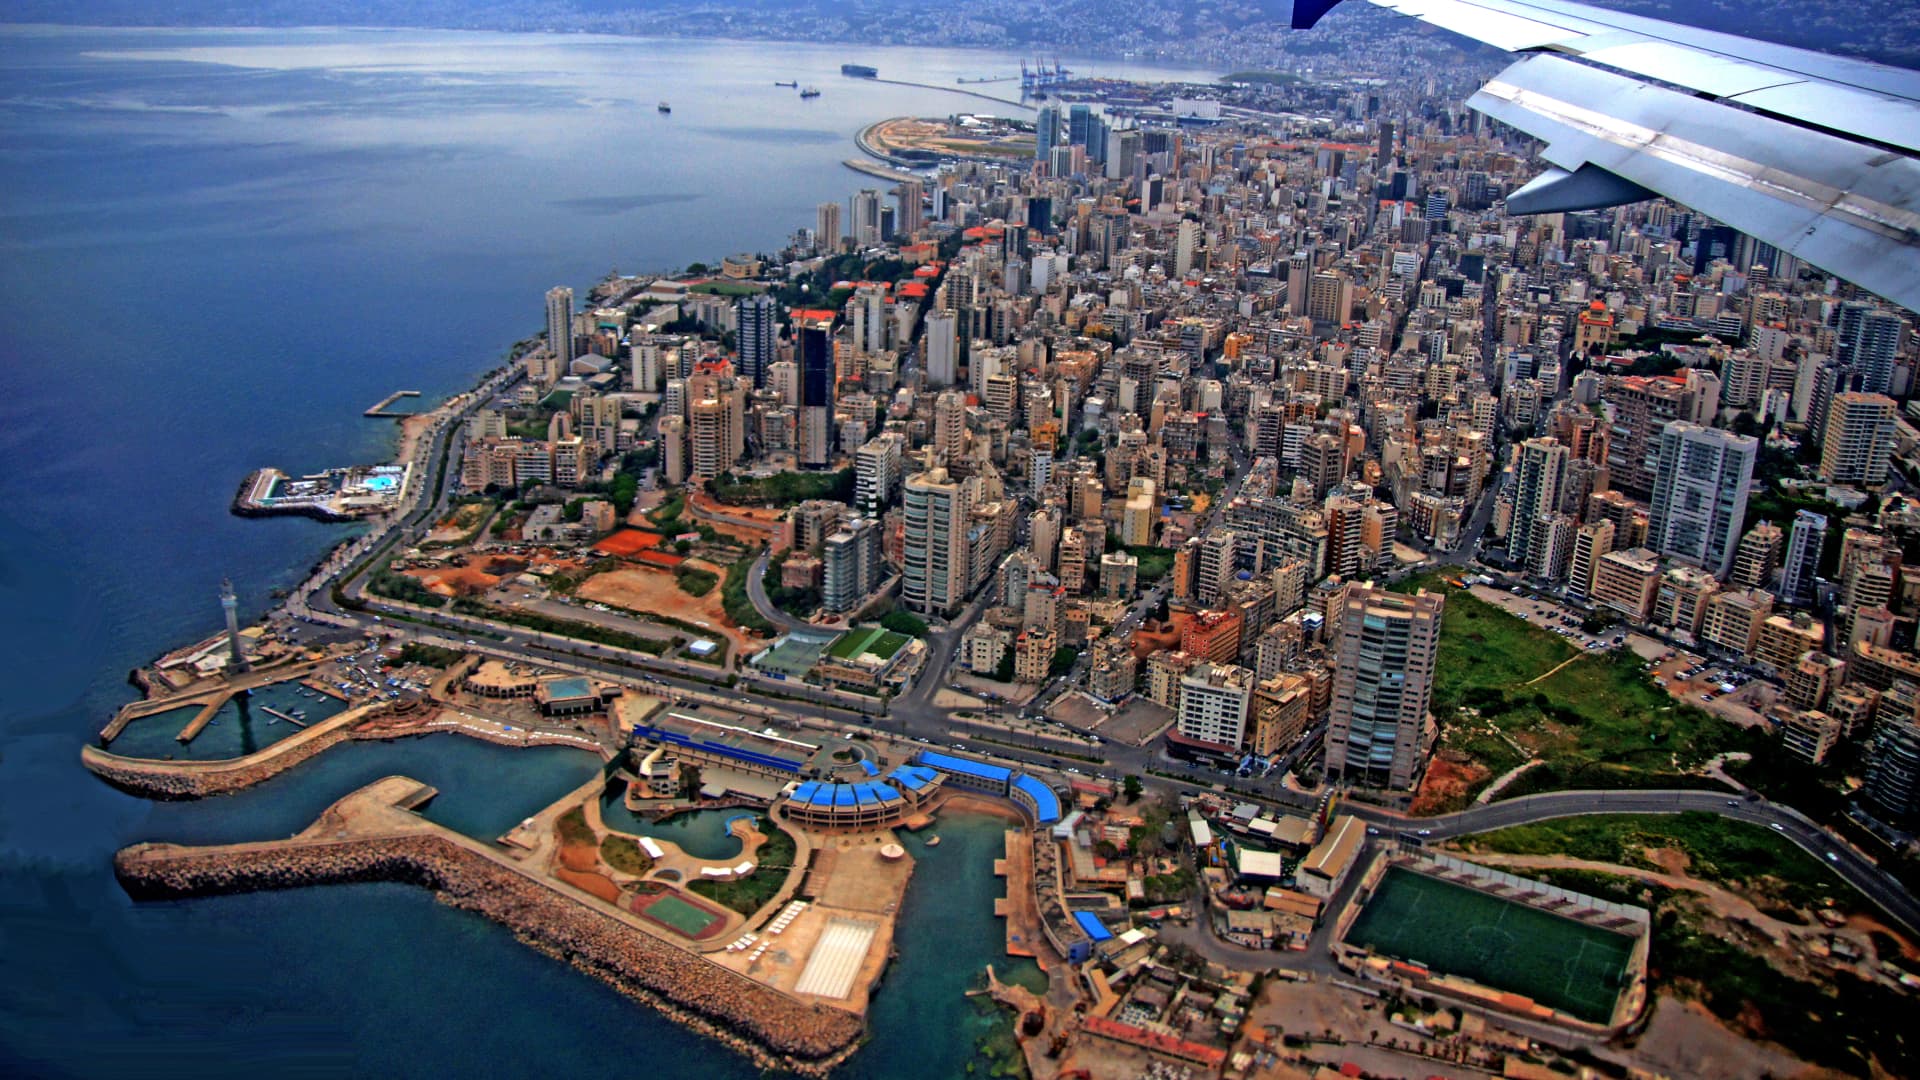 Lebanon wakes up in two simultaneous times zones as government can’t agree on daylight savings change